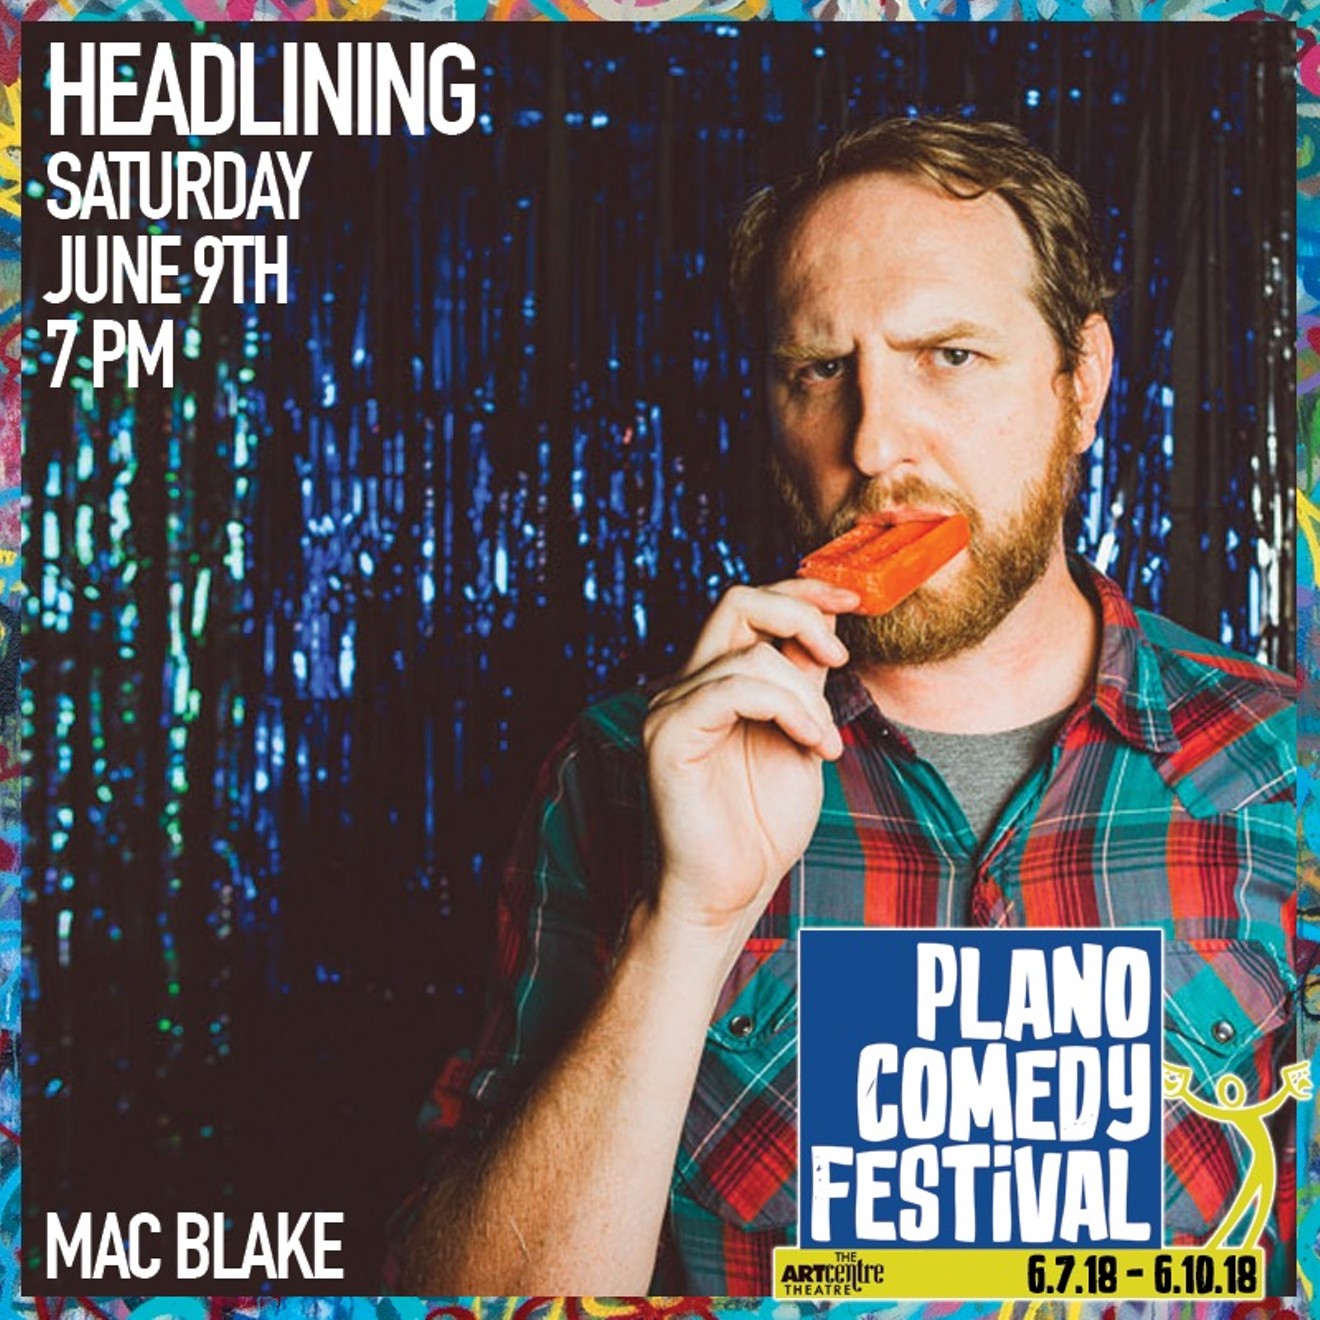 Mac Blake is one of the Texas comics who will headline the inaugural Plano Comedy Festival this Friday and Saturday.